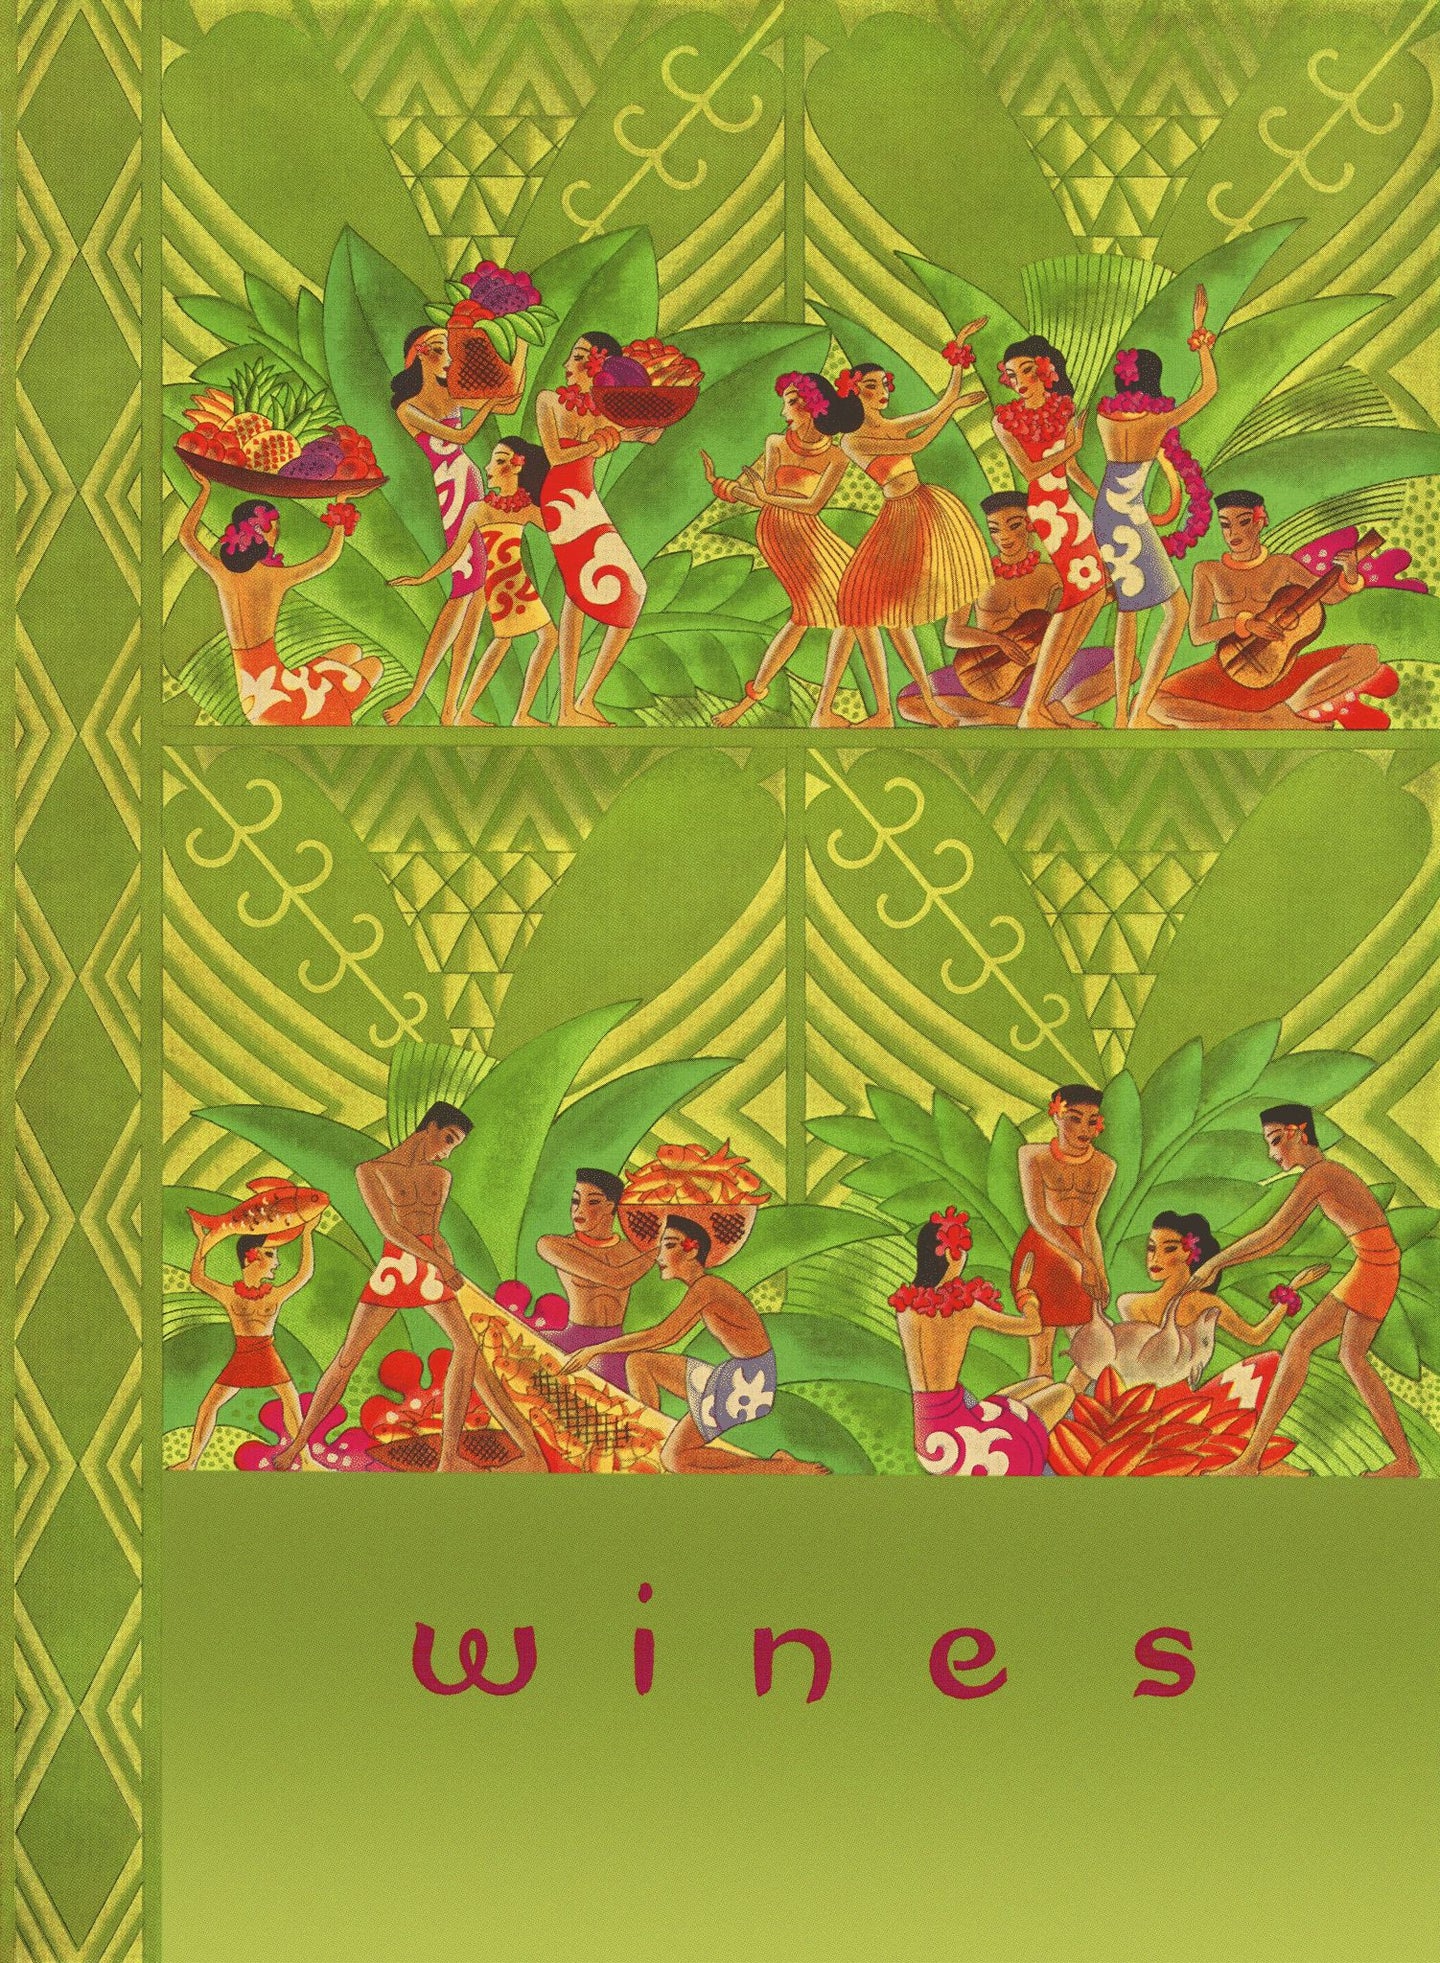 Colorful illustration of green patterned background and four scenes of native islanders engaged in various activities of holding fruits, dancing, fishing, and cooking. The word “wines” is written at the bottom.